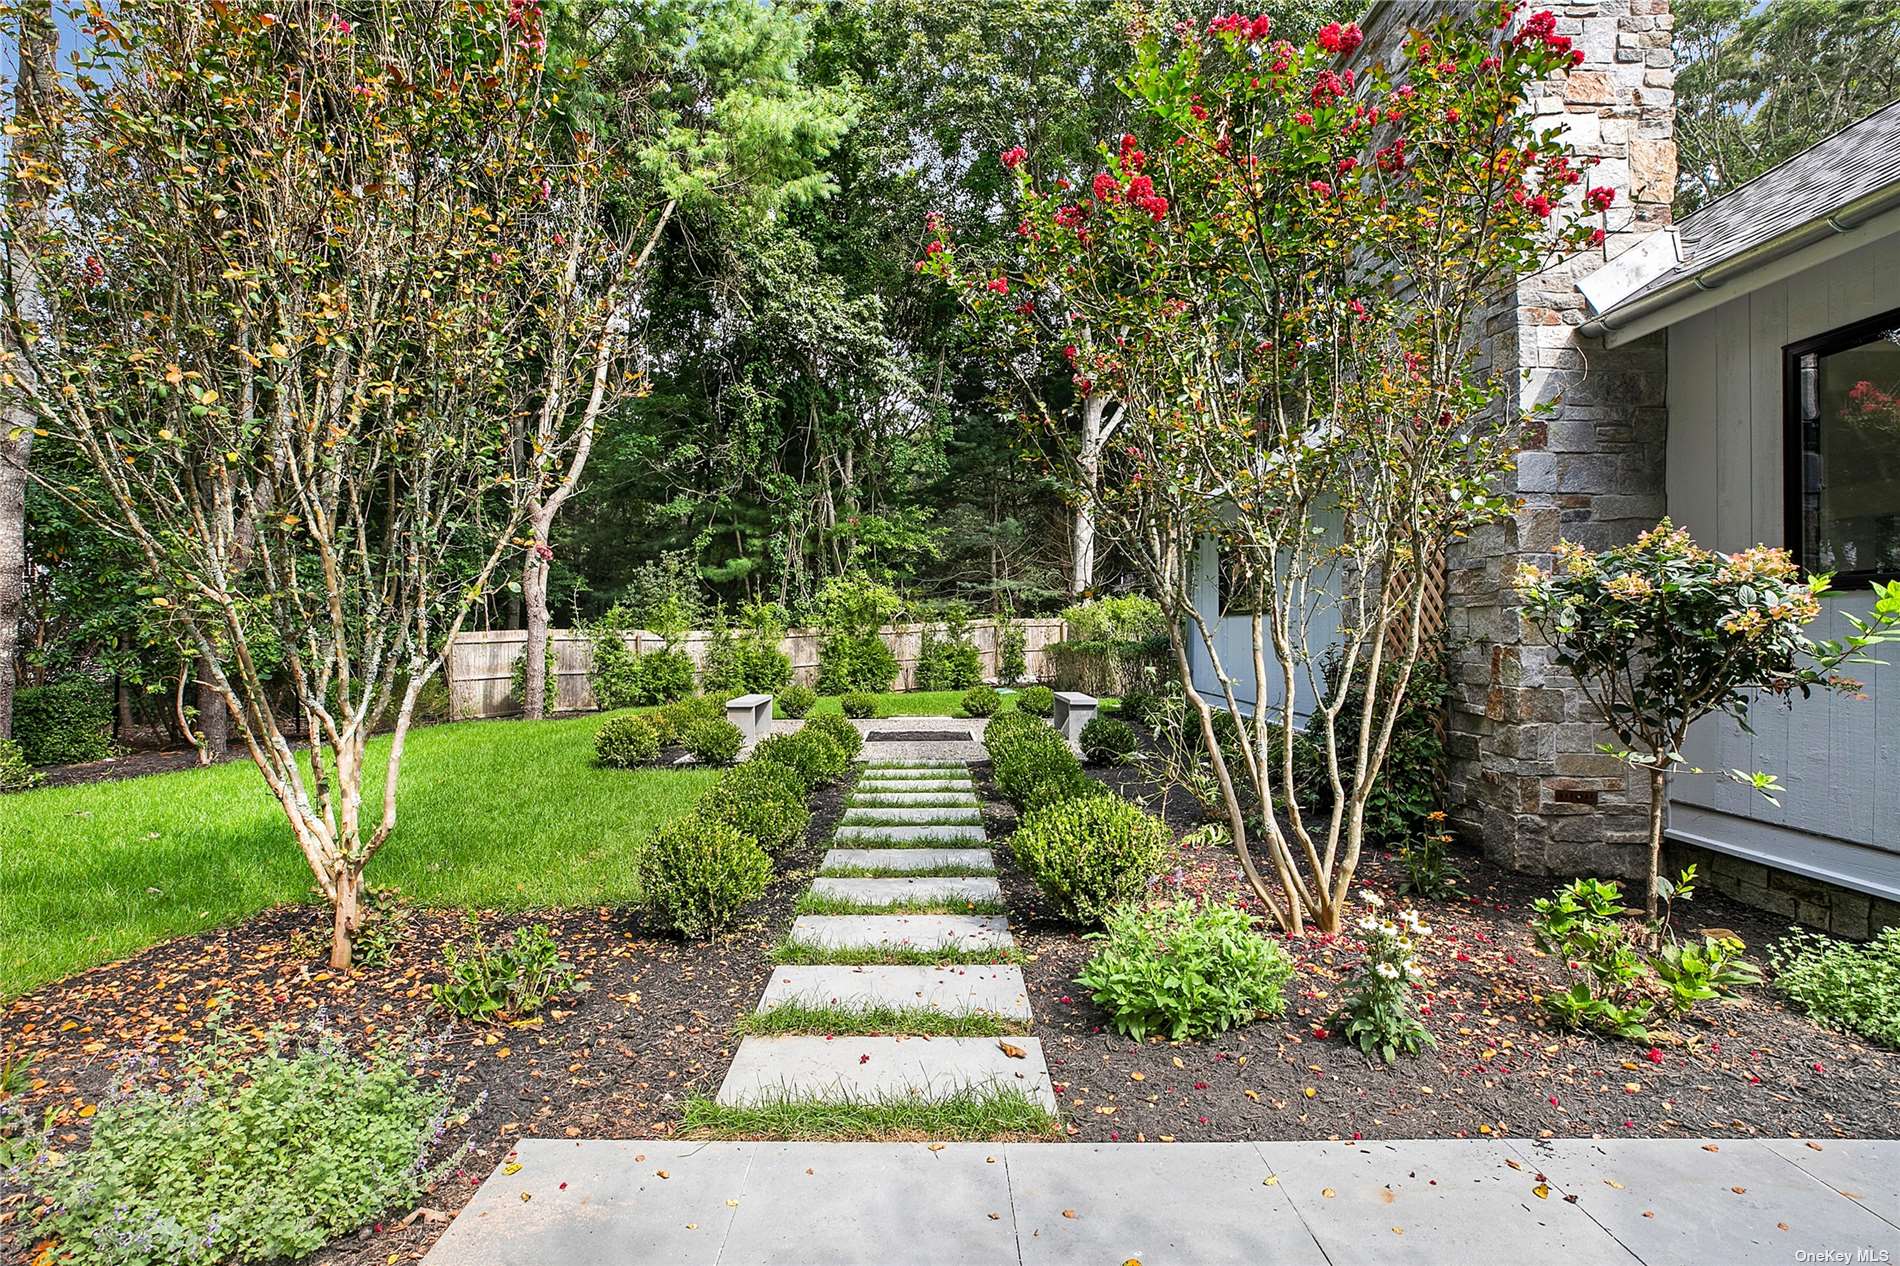 a view of a pathway of flower garden